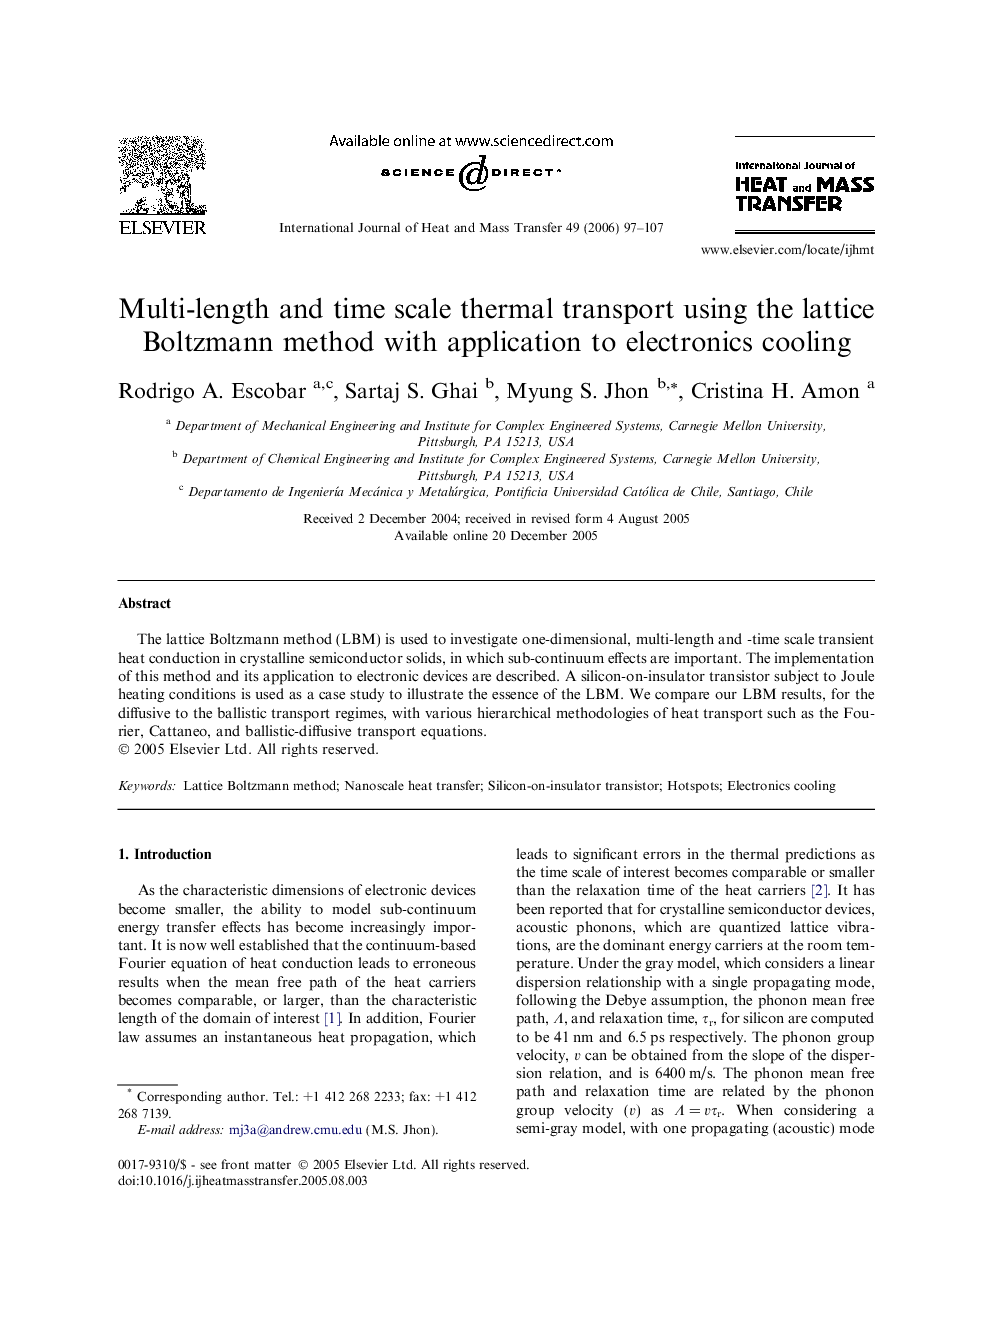 Multi-length and time scale thermal transport using the lattice Boltzmann method with application to electronics cooling